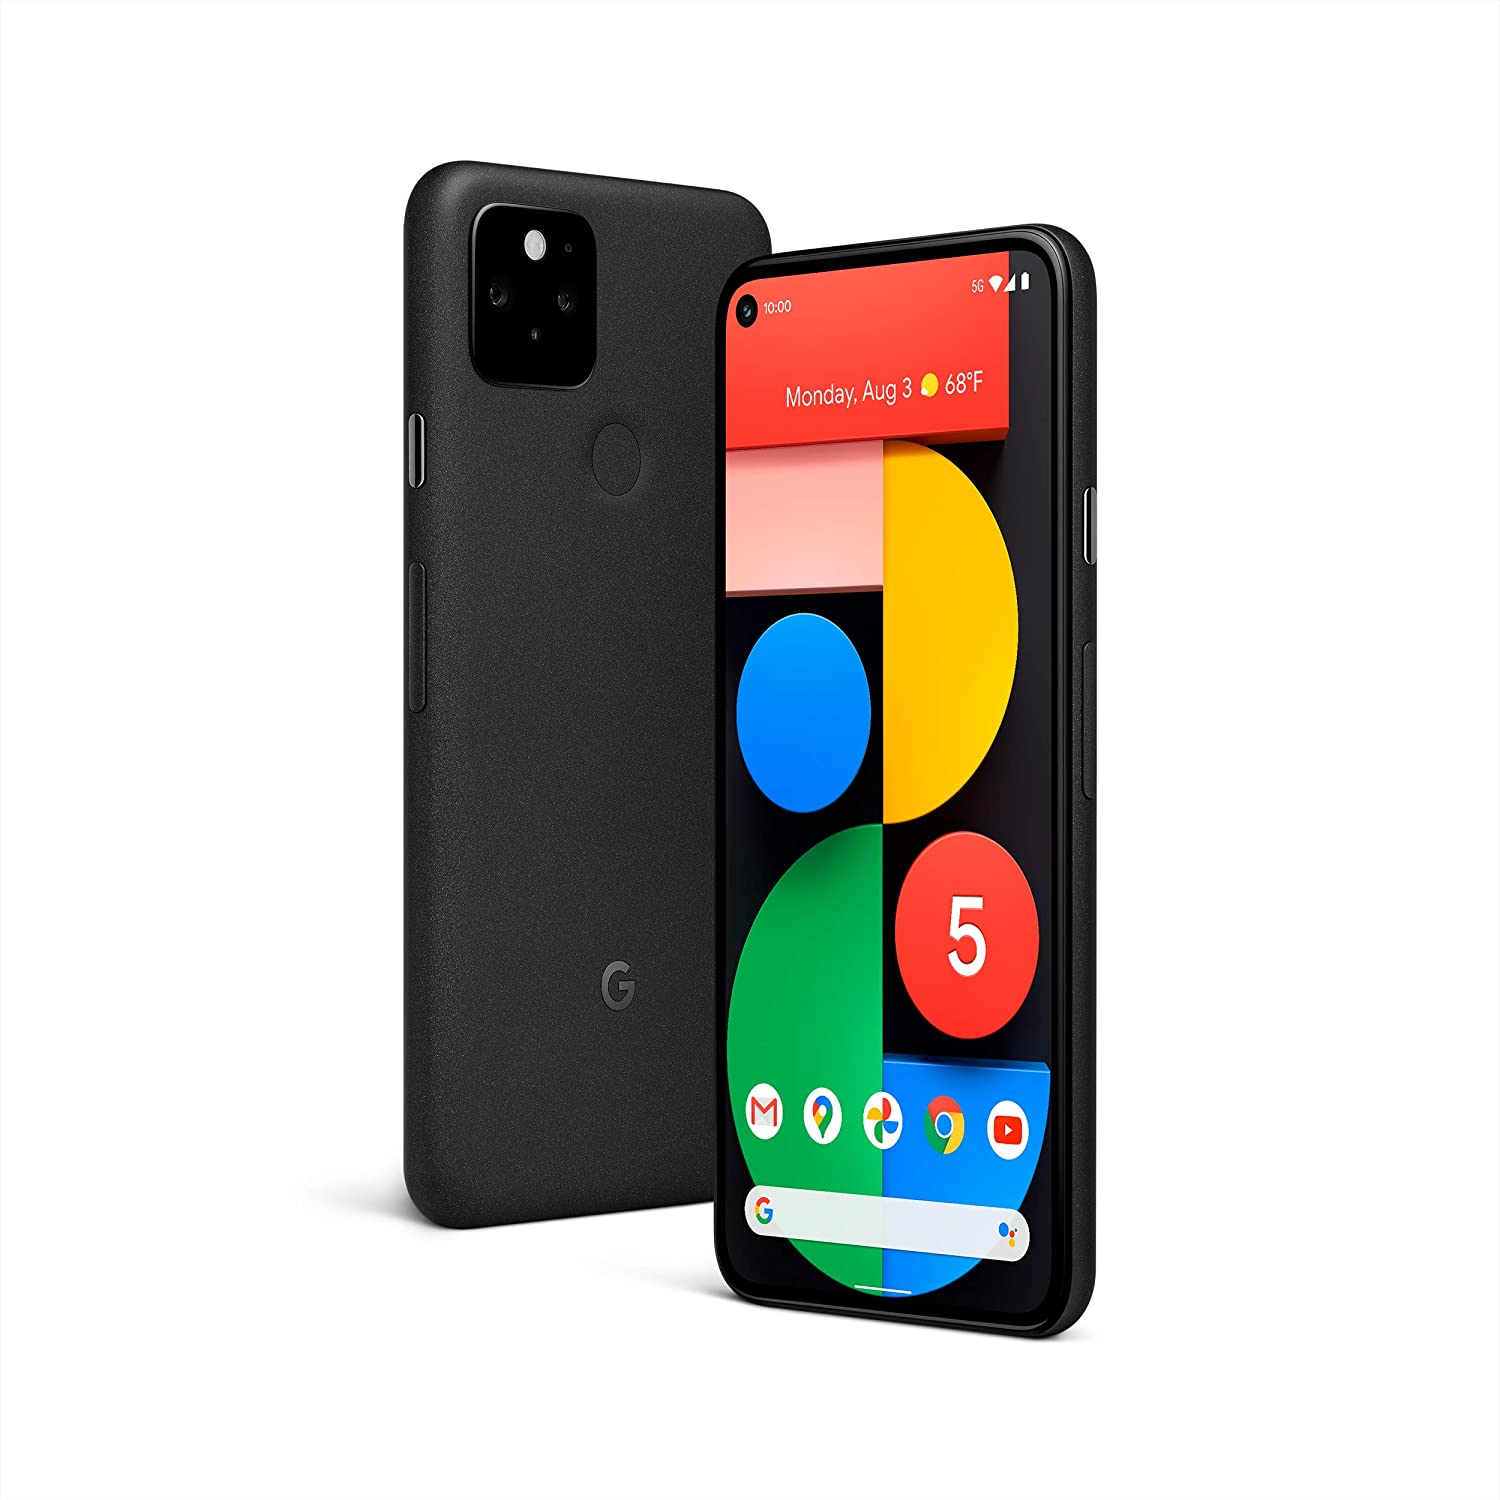 Pixel 5 5G Google Phone Review- All You Need to Know